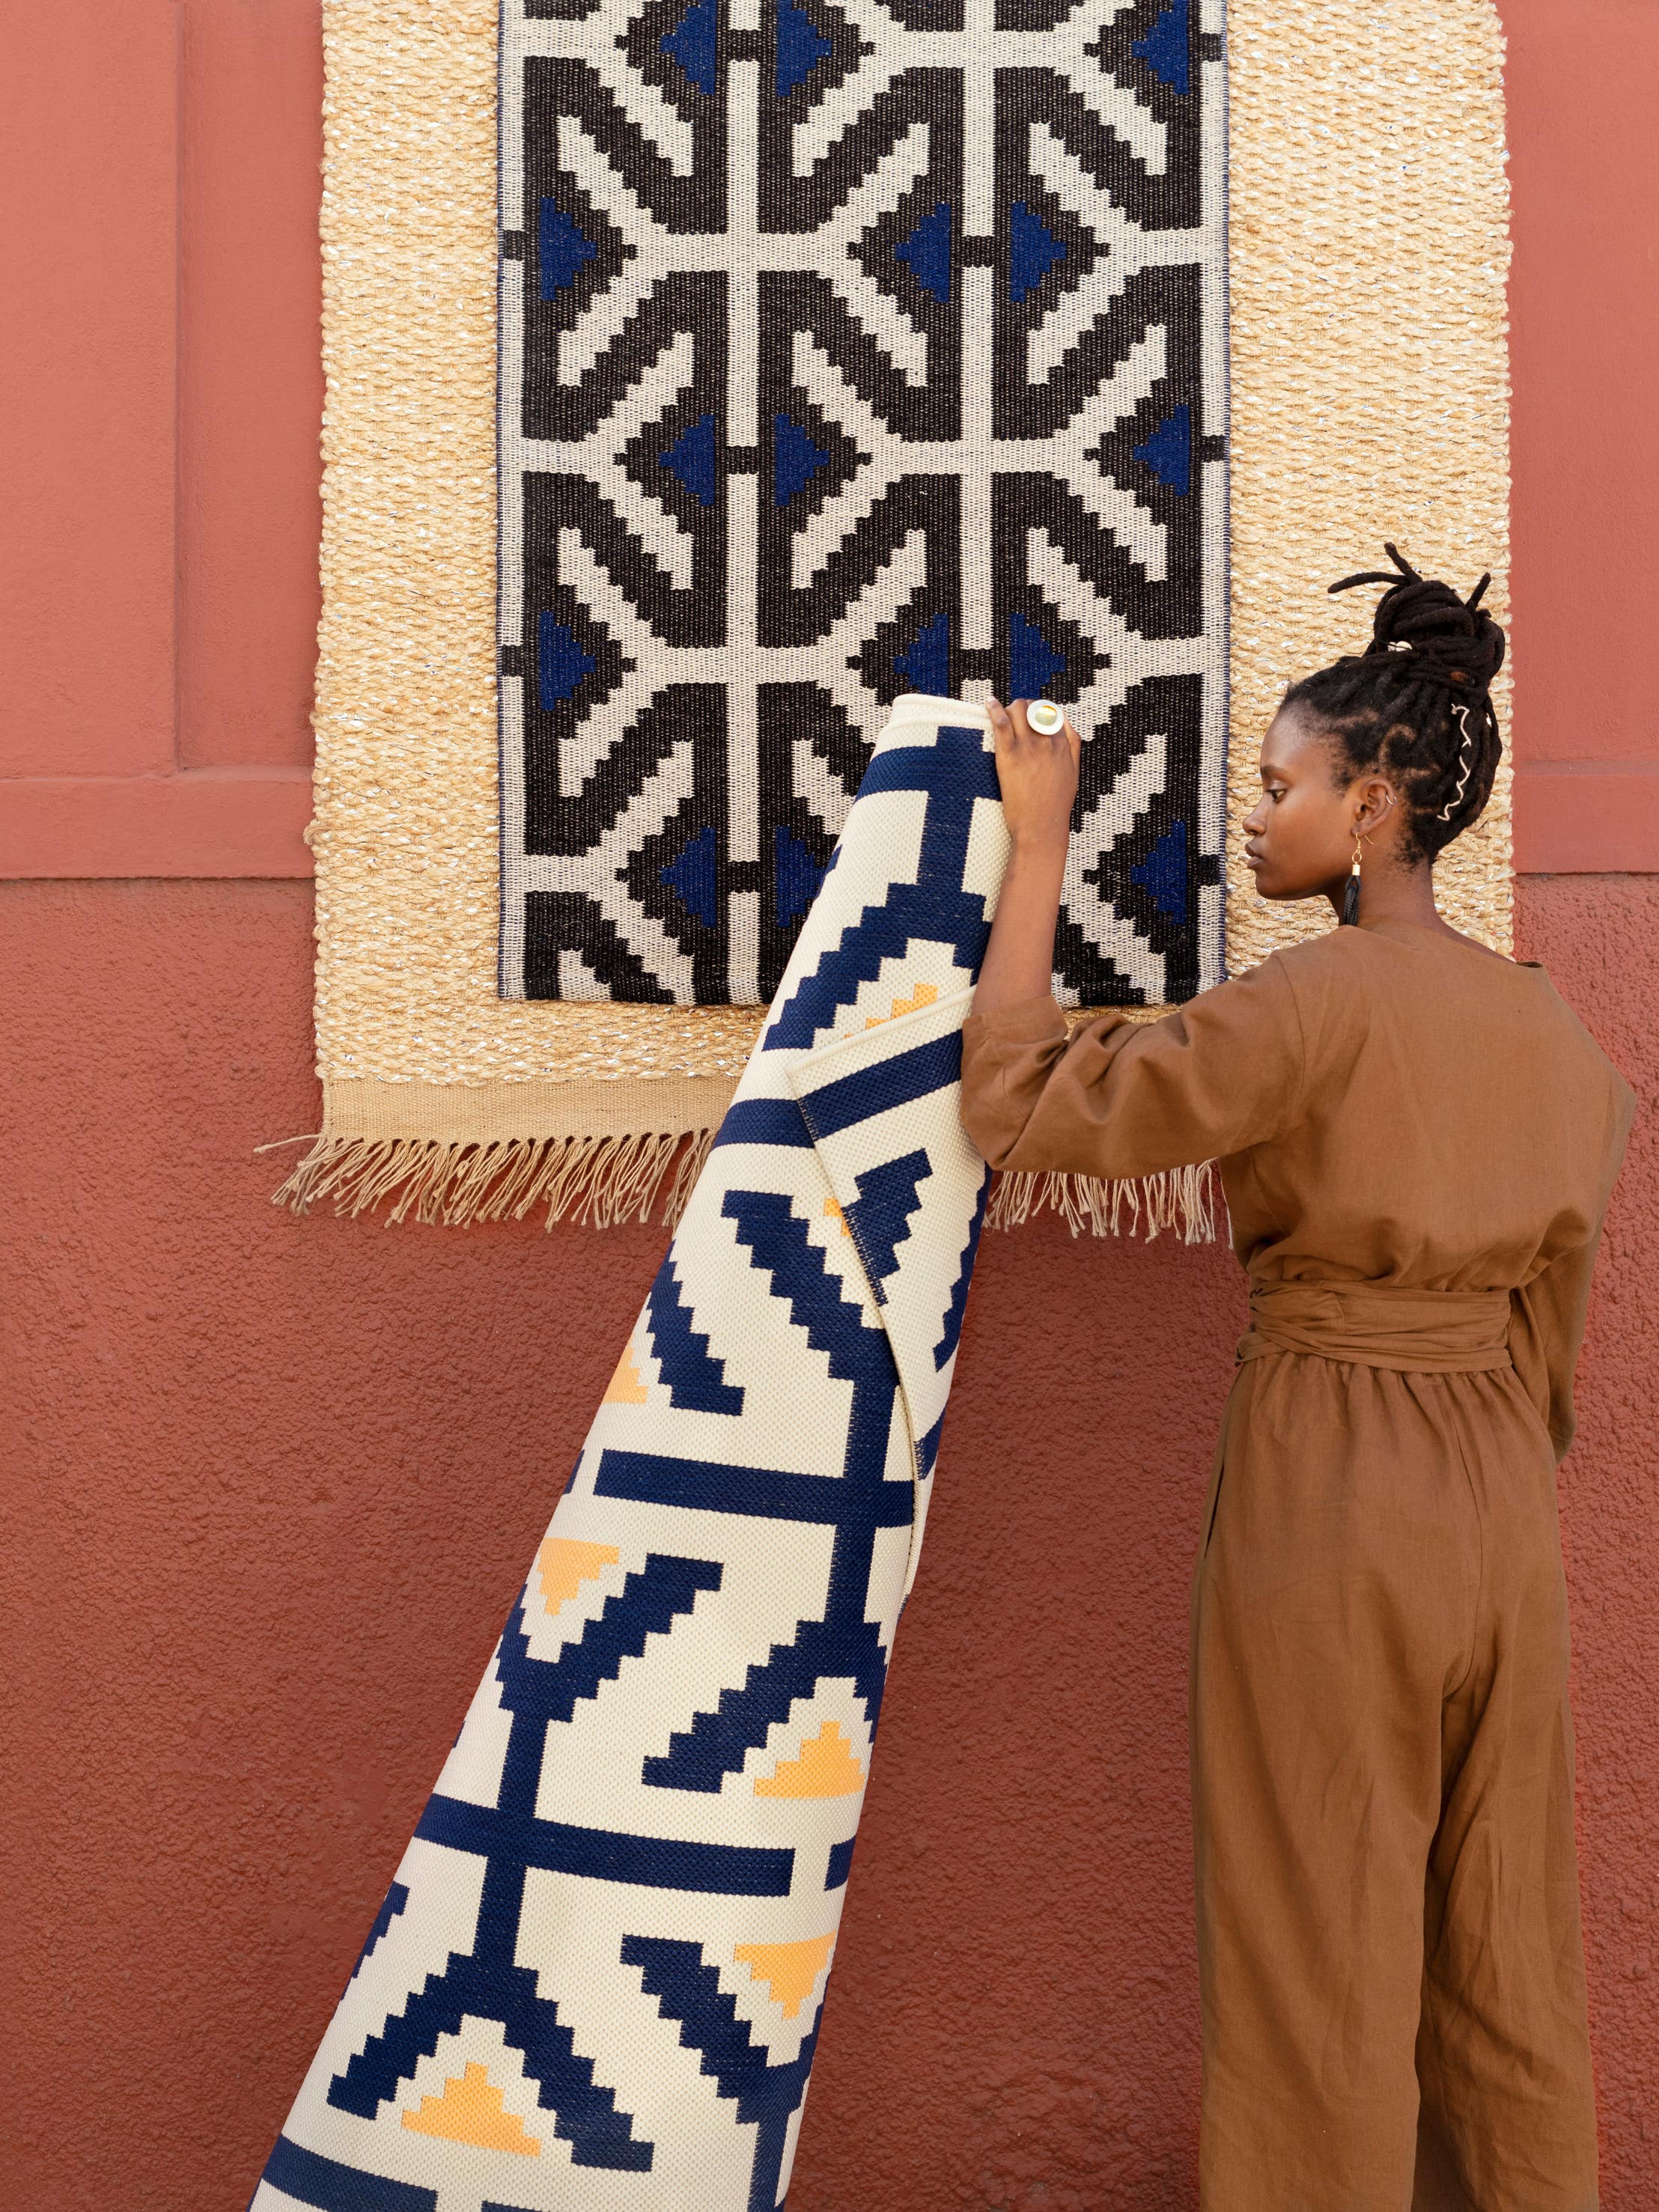 IKEA’s Powerful, New Collection Shines a Bright Light on African Design